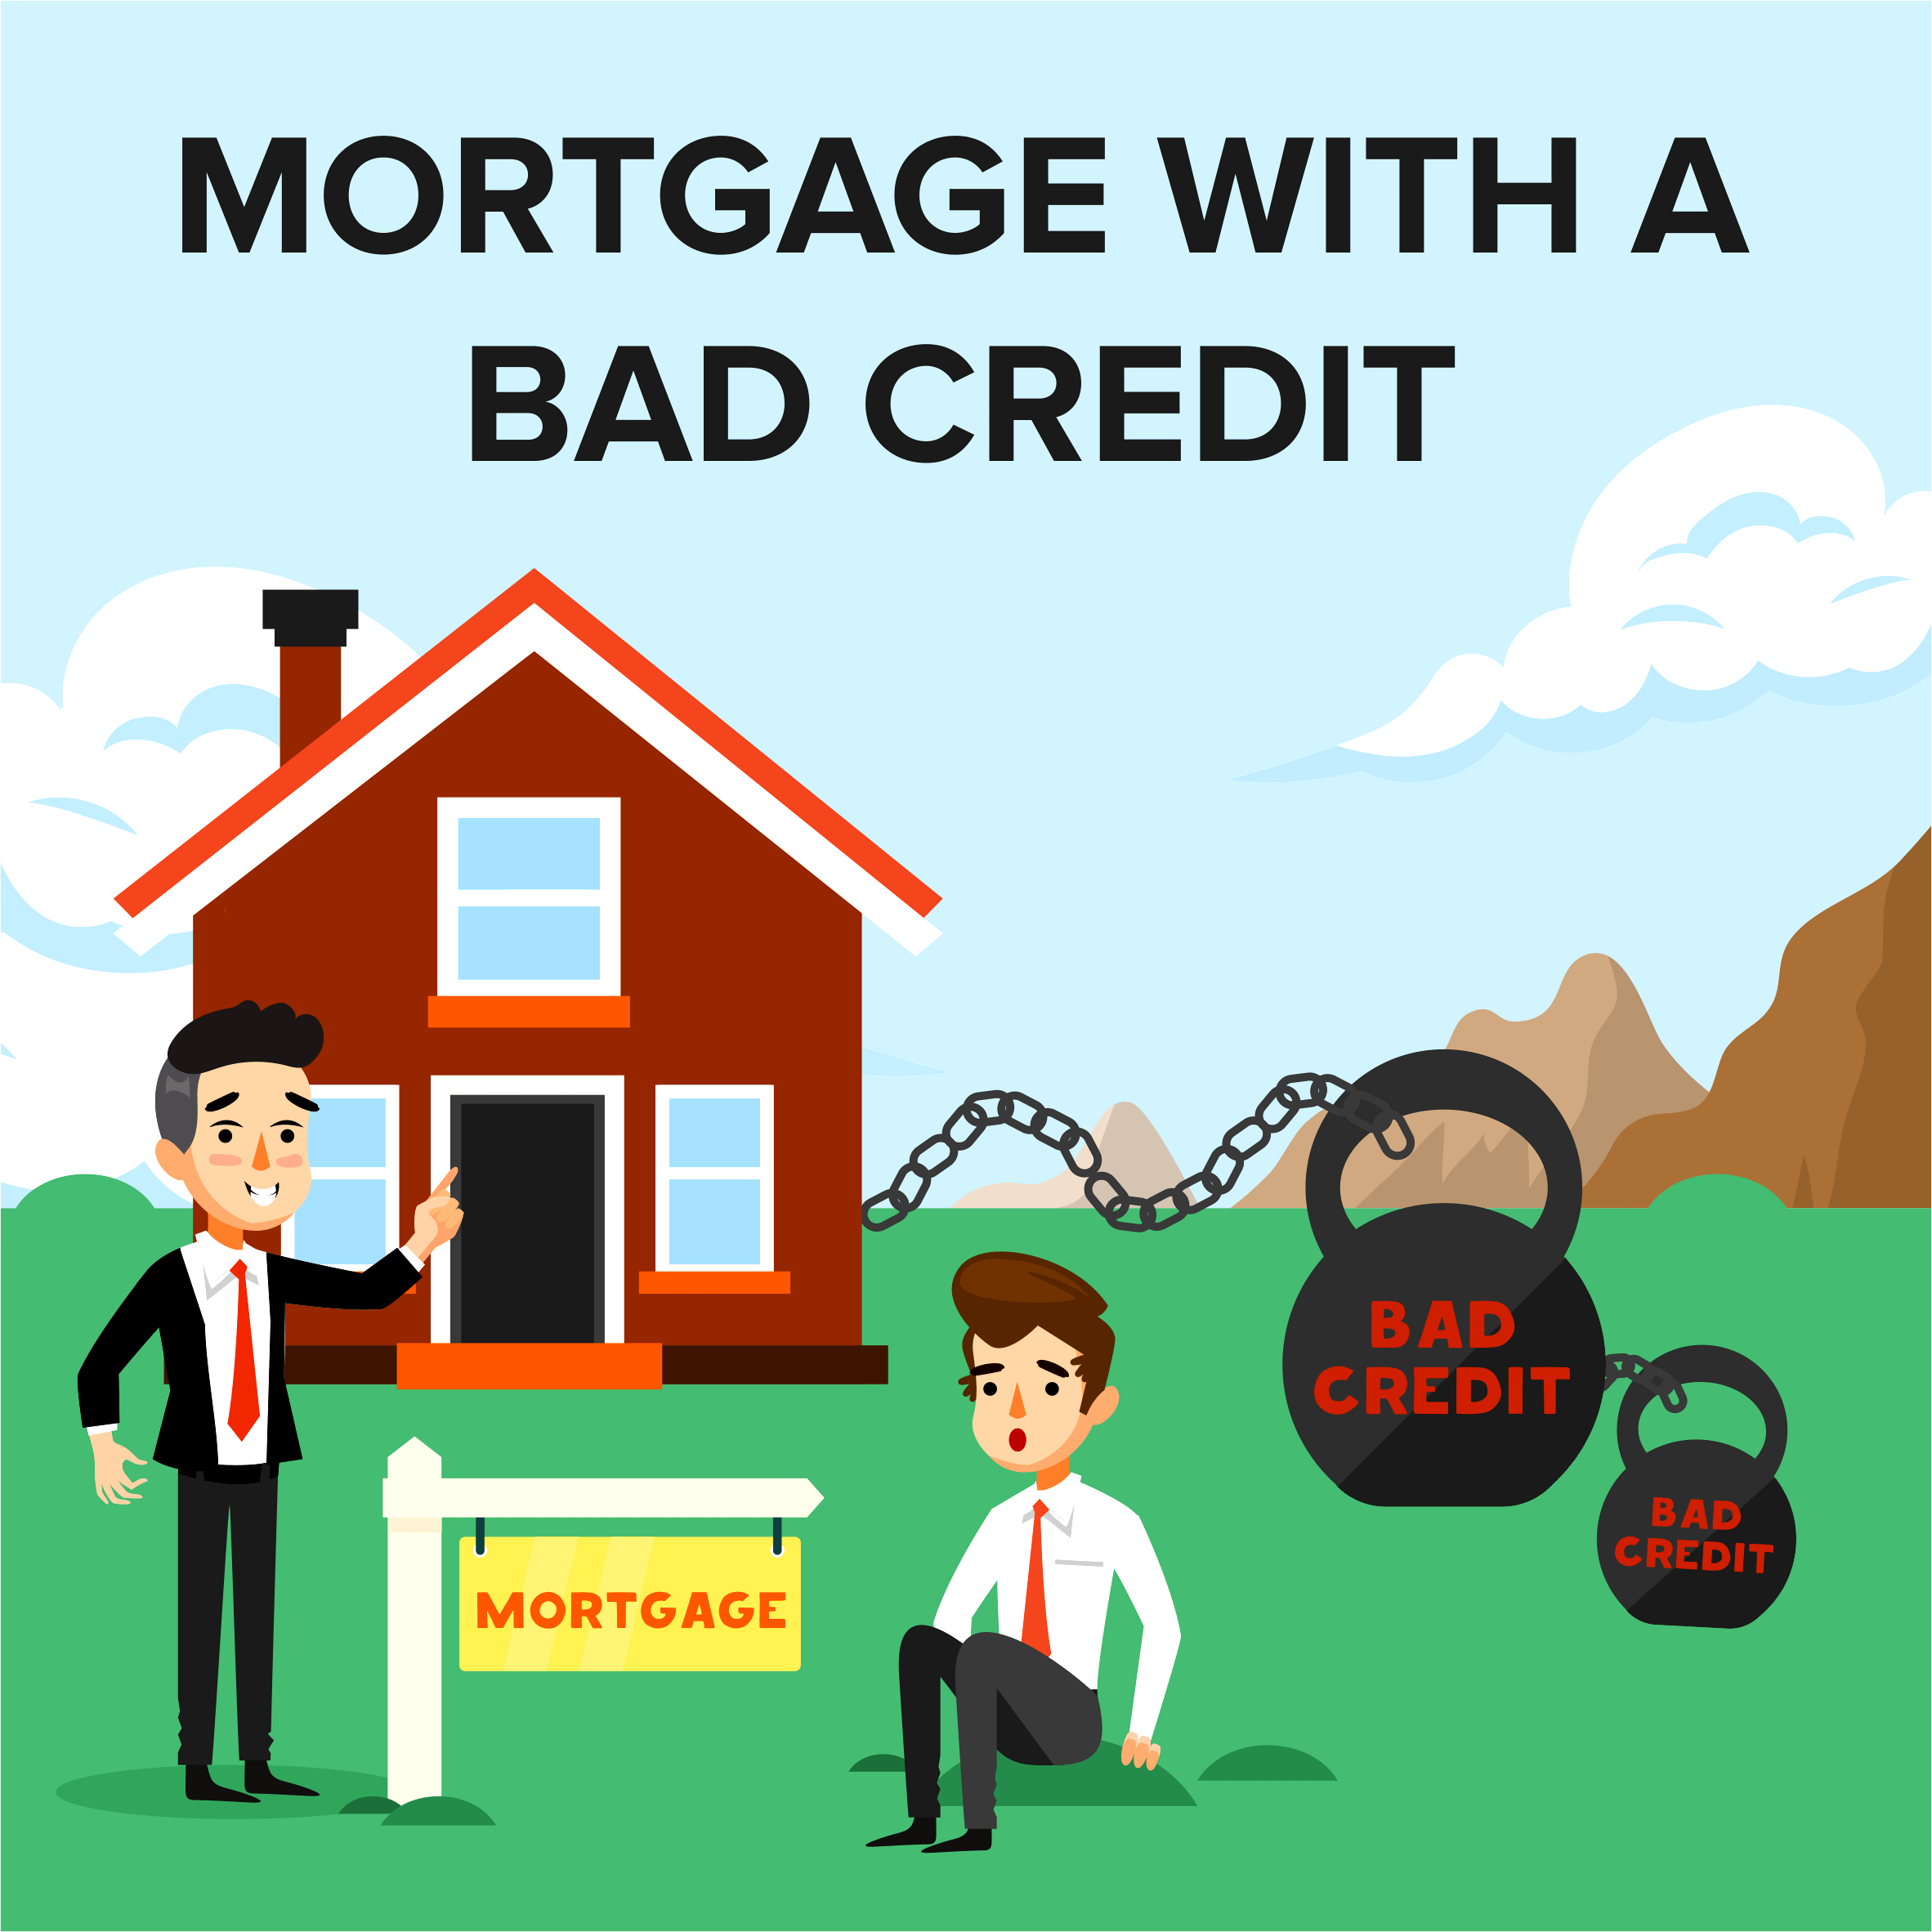 Bad Credit Mortgage Lenders – Comparing Interest Rates And Mortgage Programs